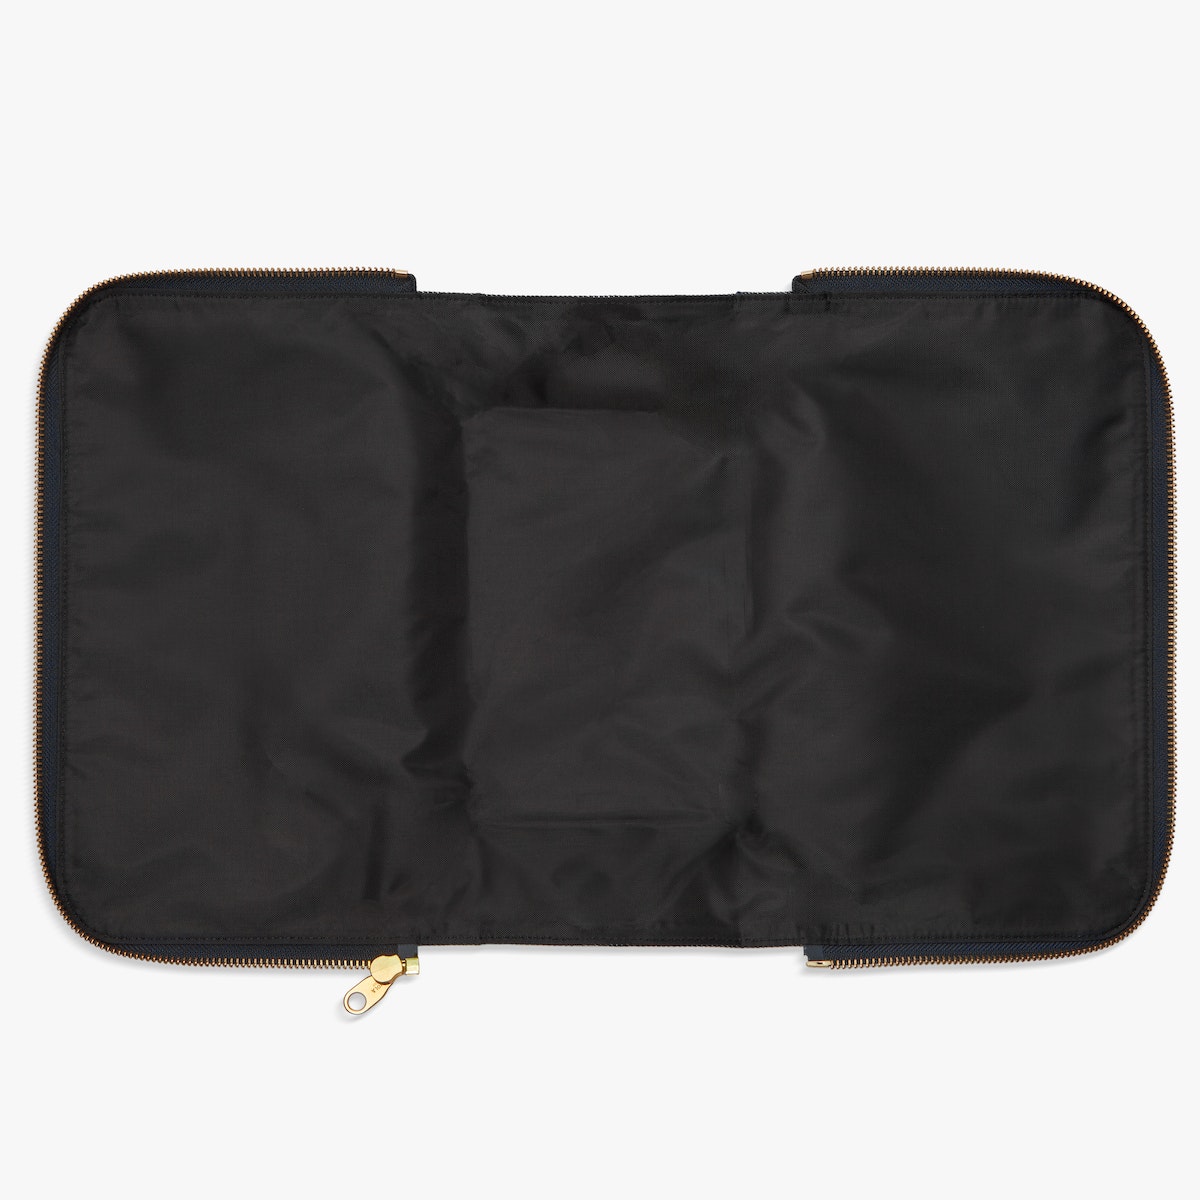 LARGE FOLD OUT COSMETIC CASE | Denim